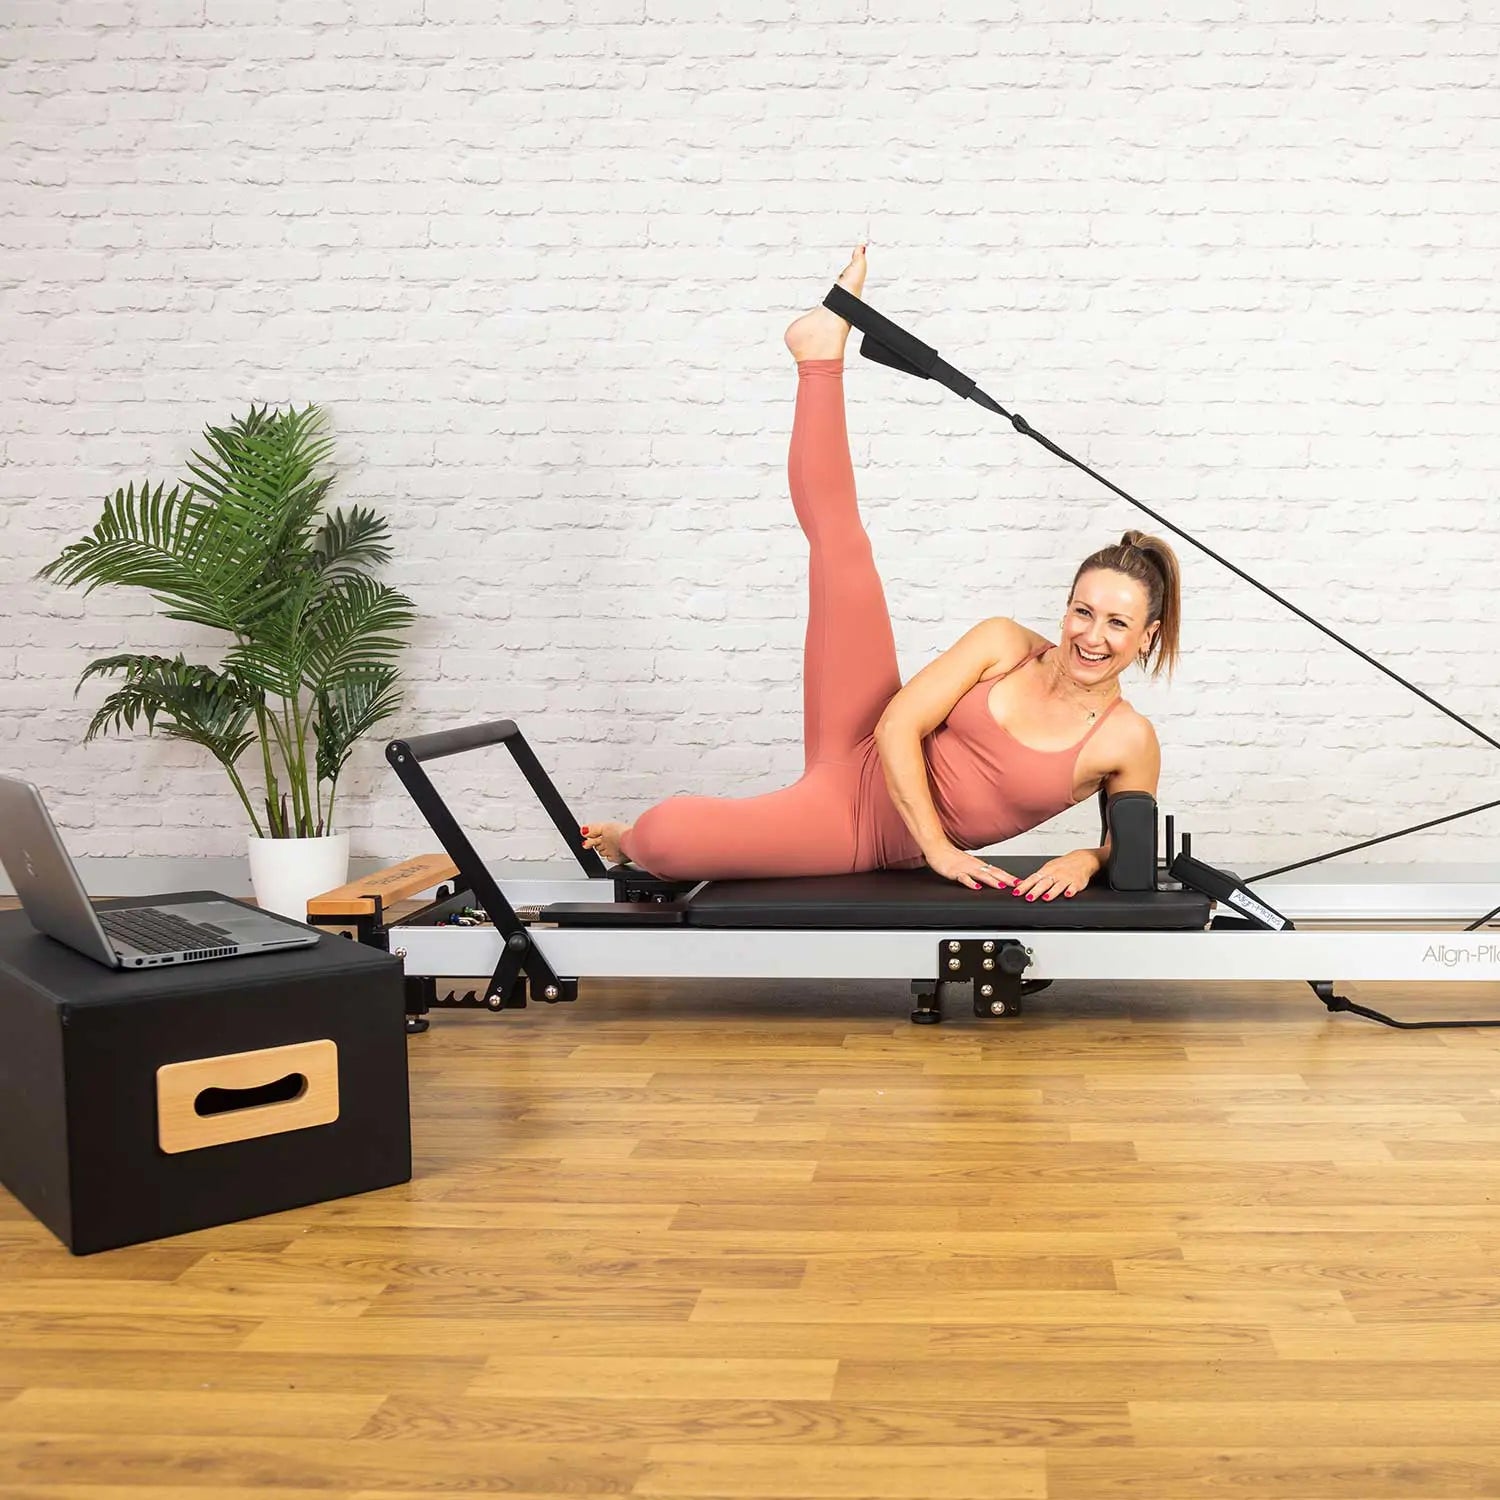 Buy Private Pilates Sitting Box with Free Shipping – Pilates Reformers Plus